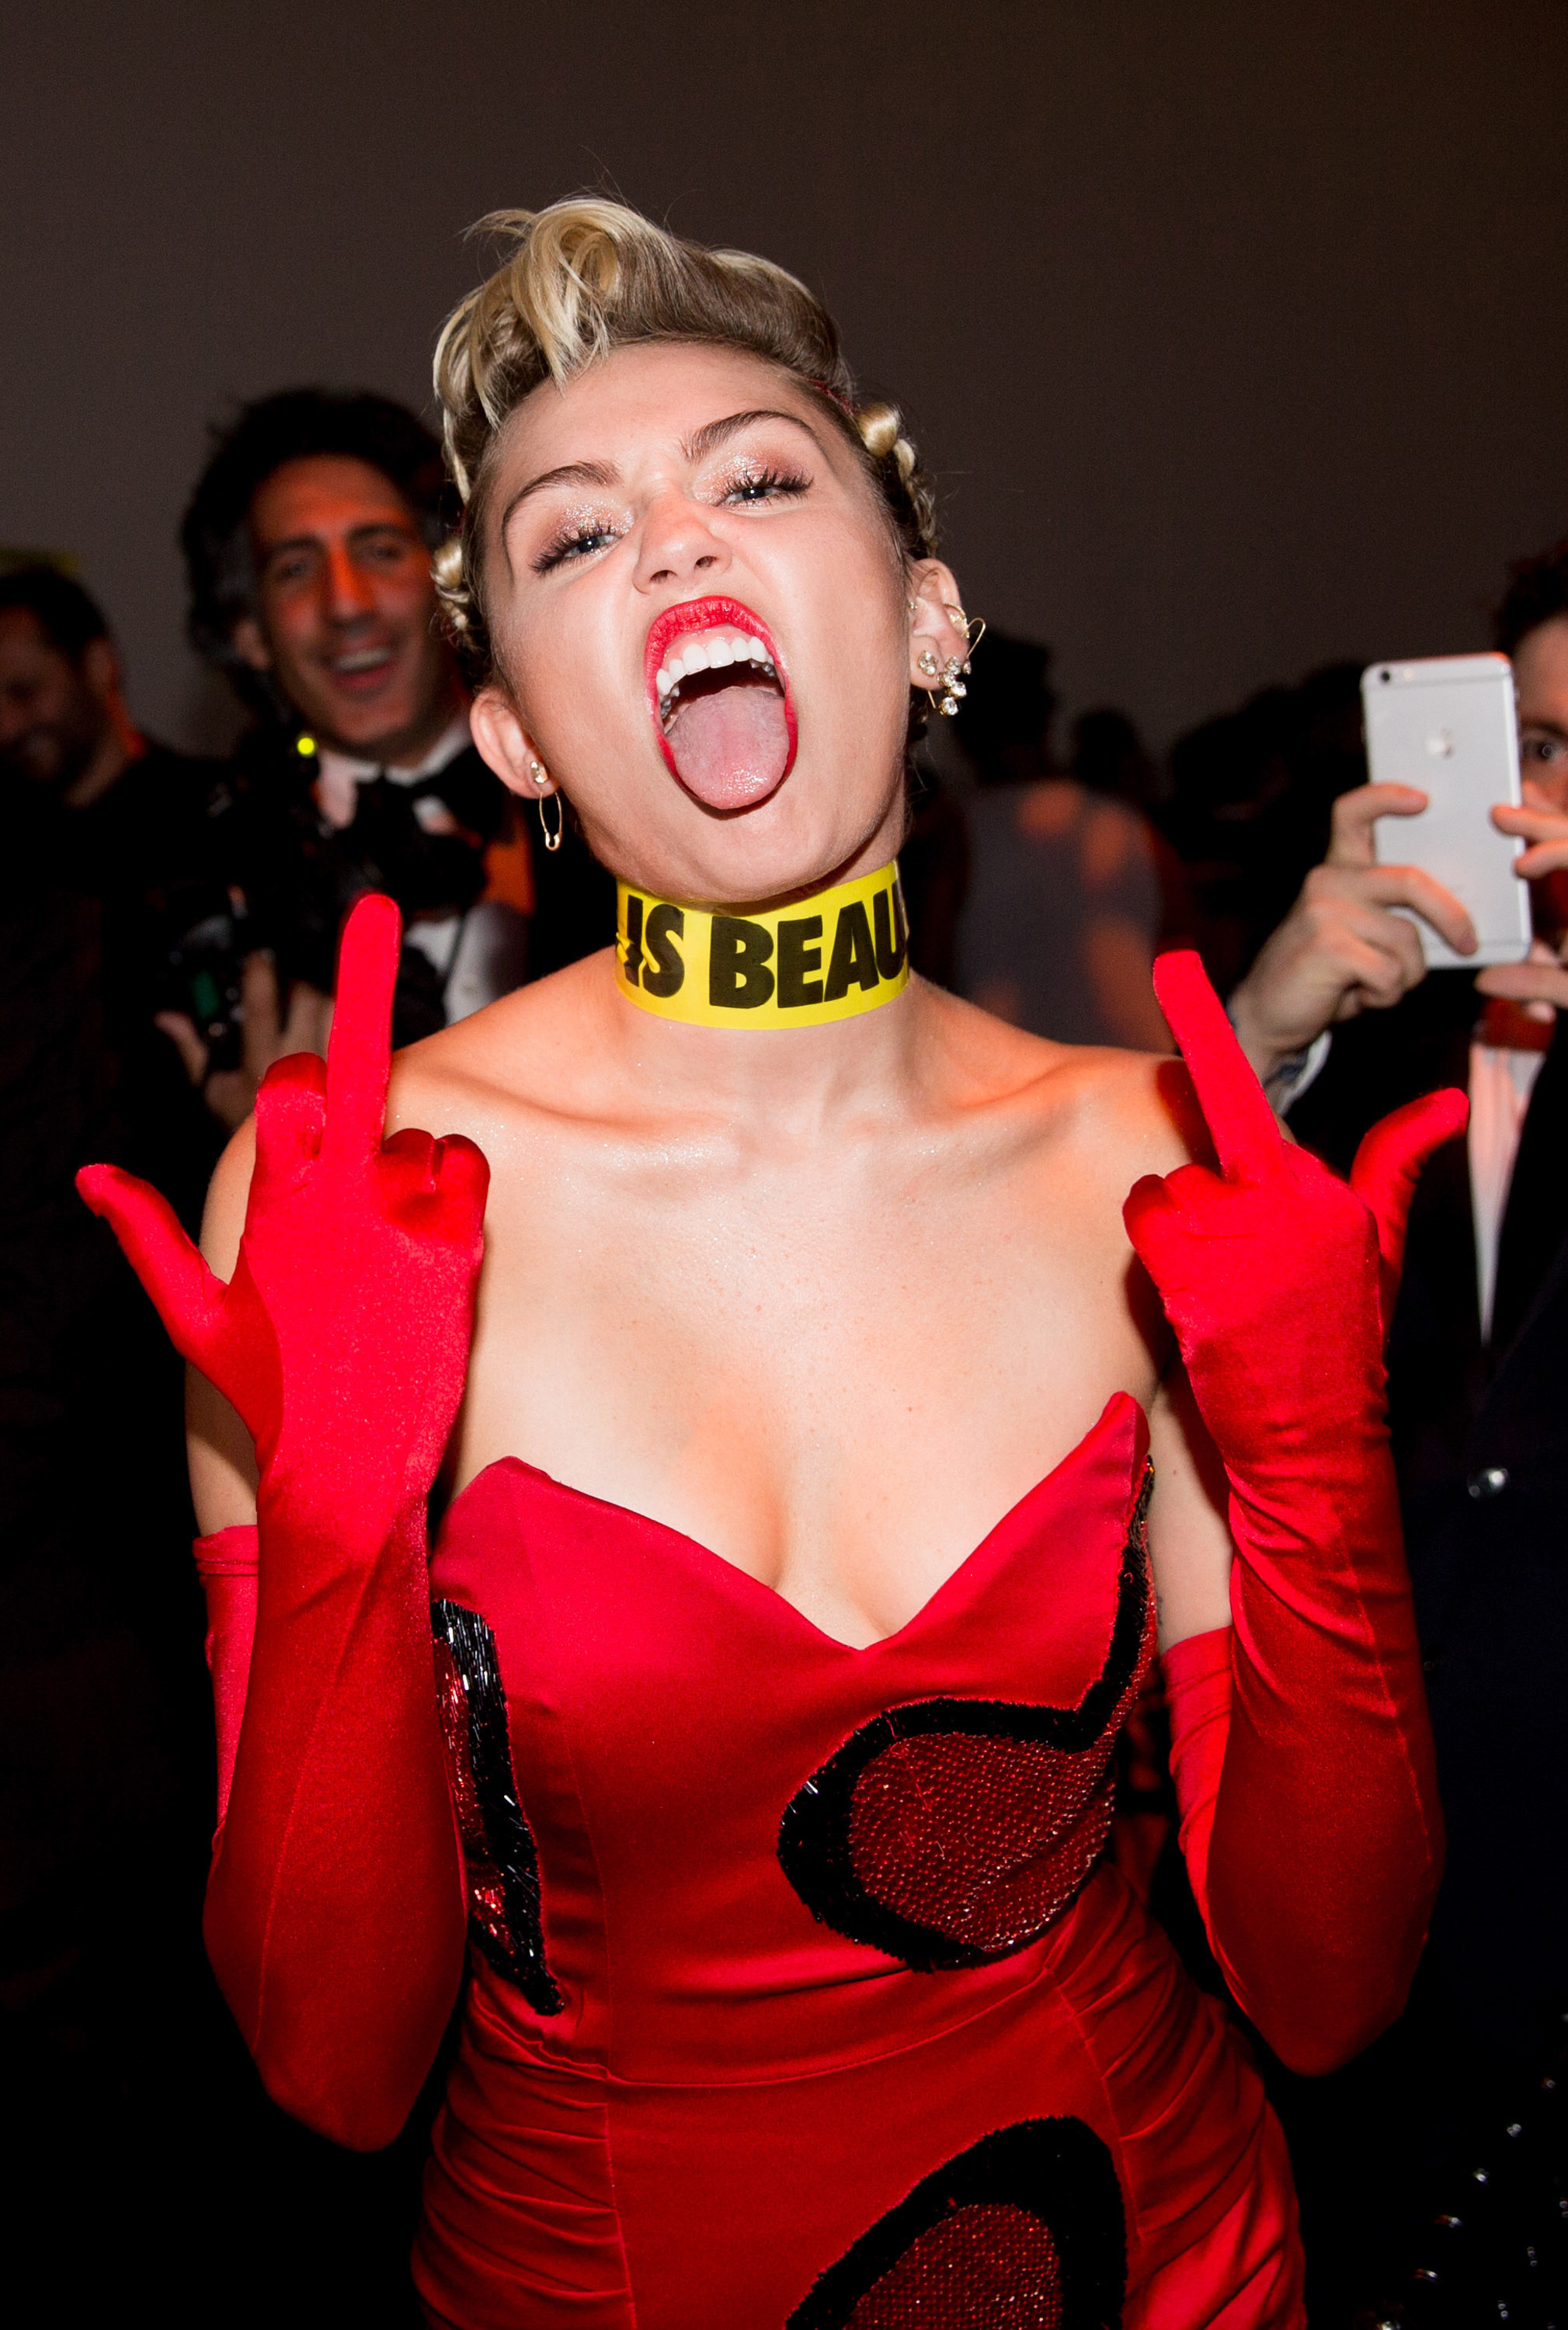 Close-up of Miley sticking her tongue out and raising her middle fingers